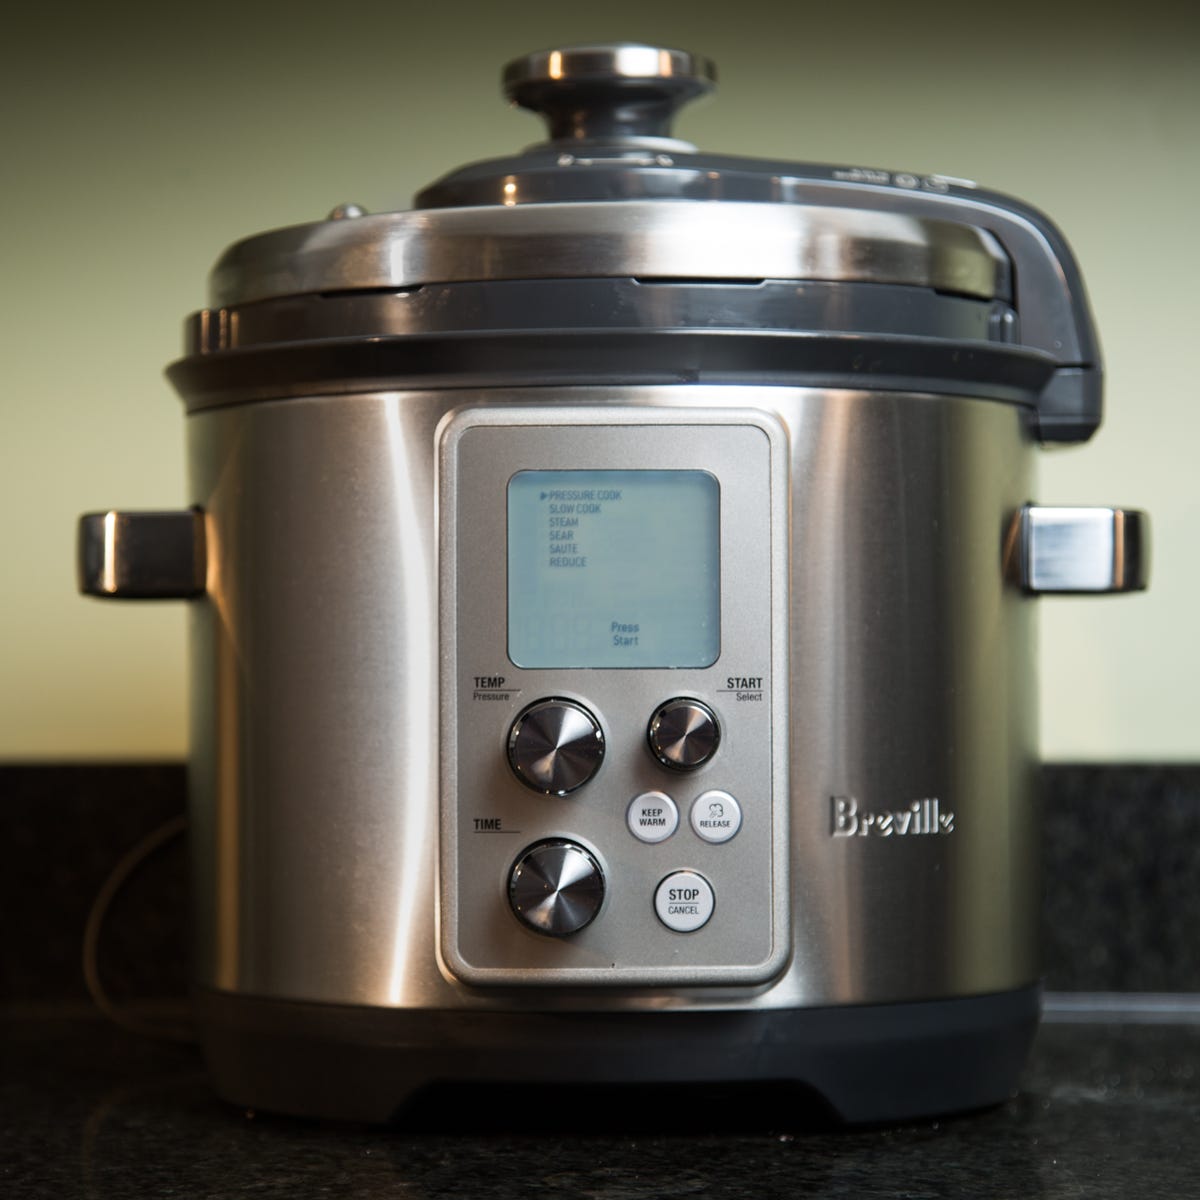 Breville Fast Slow Pro review: A tricky lid slows down this